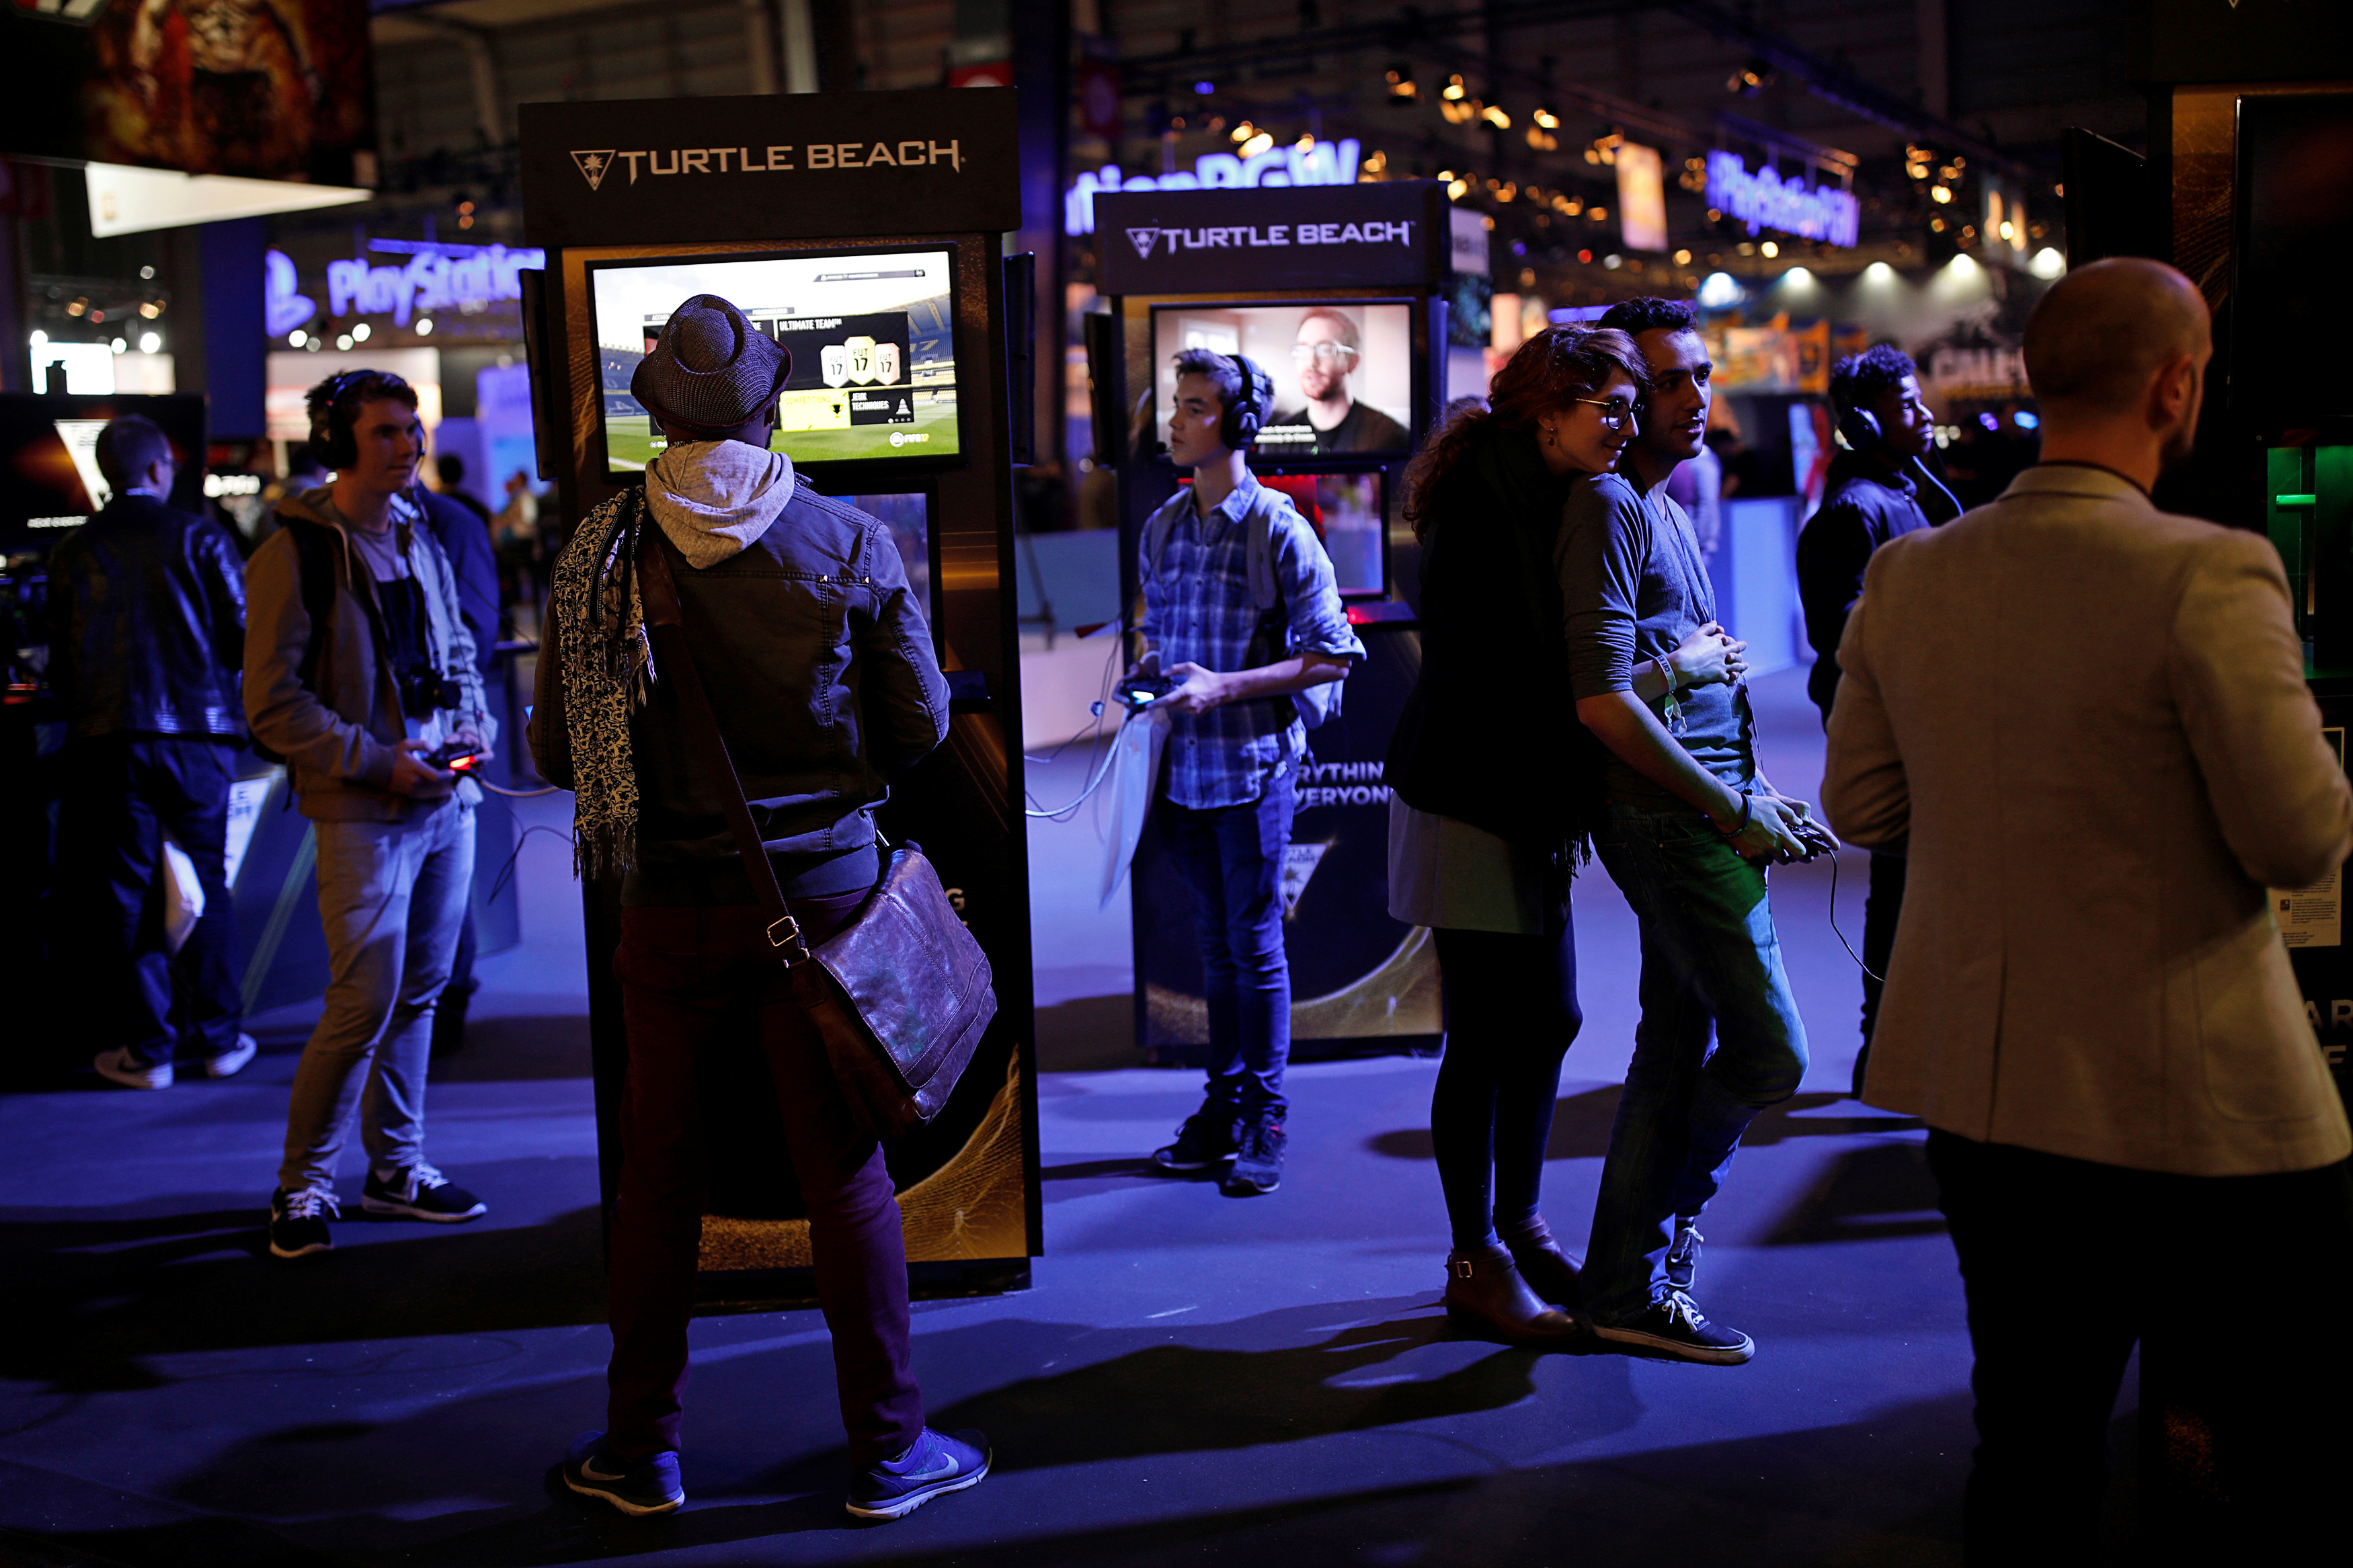 Visitors play video games with Turtle Beach headphones at the Paris Games Week, a trade fair for video games in Paris